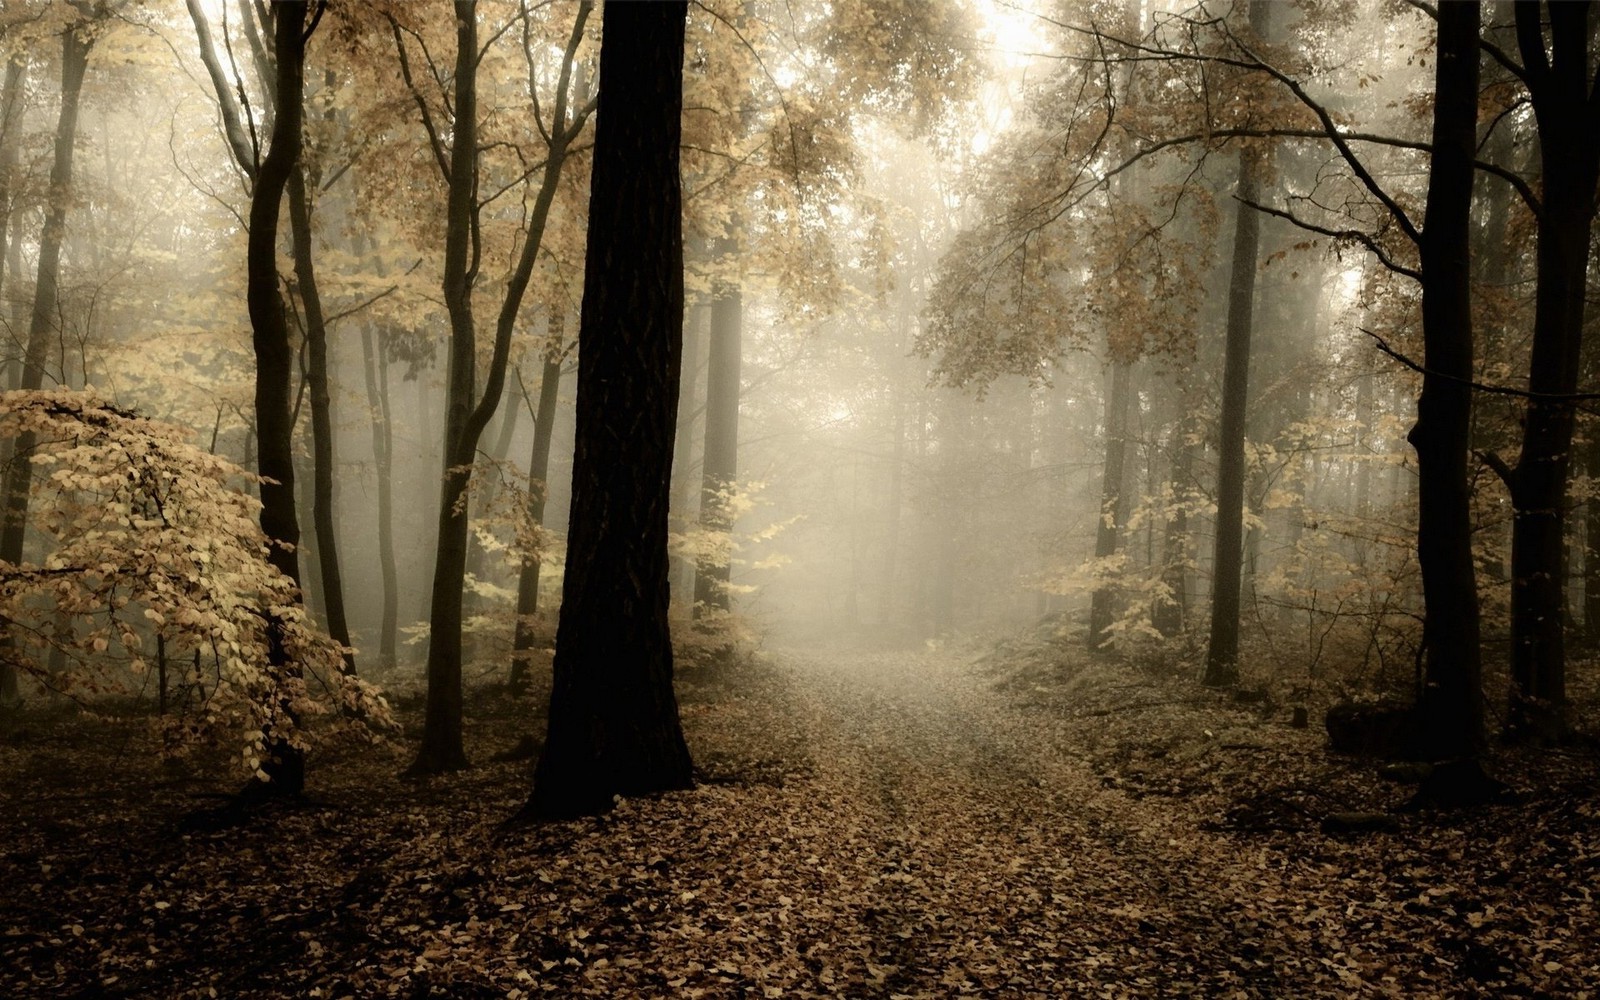 Wallpaper, 1600x1000 px, atmosphere, dark, fall, forest, landscape, leaves, mist, morning, nature, path, trees 1600x1000